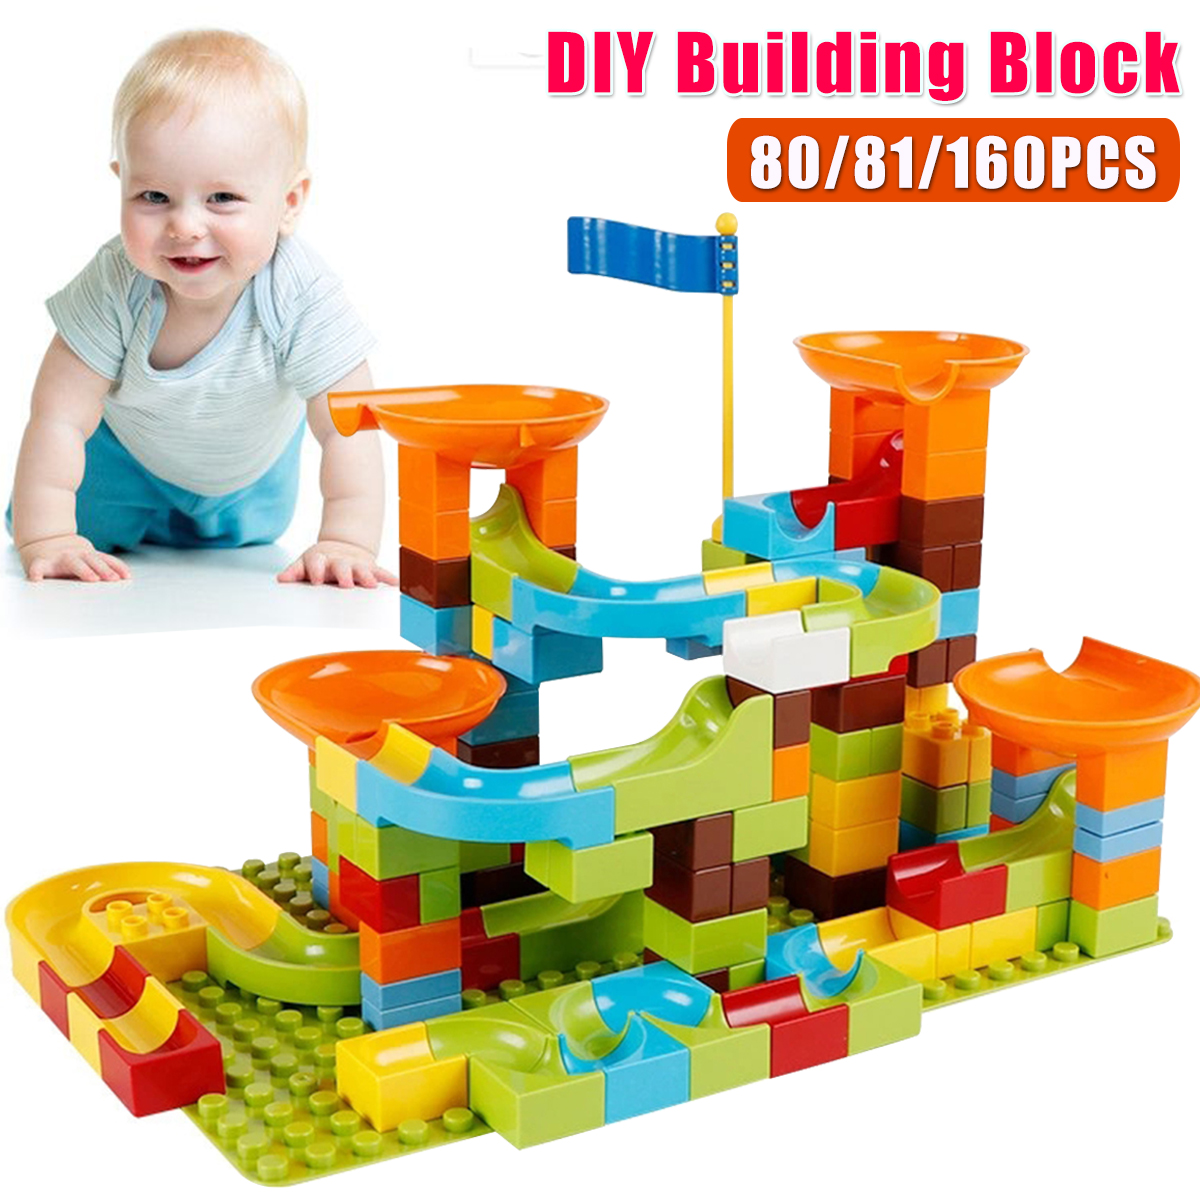 8081160Pcs-DIY-Assembly-Kids-Game-Play-Building-Blocks-Toys-for-Kids-Gift-1678176-1